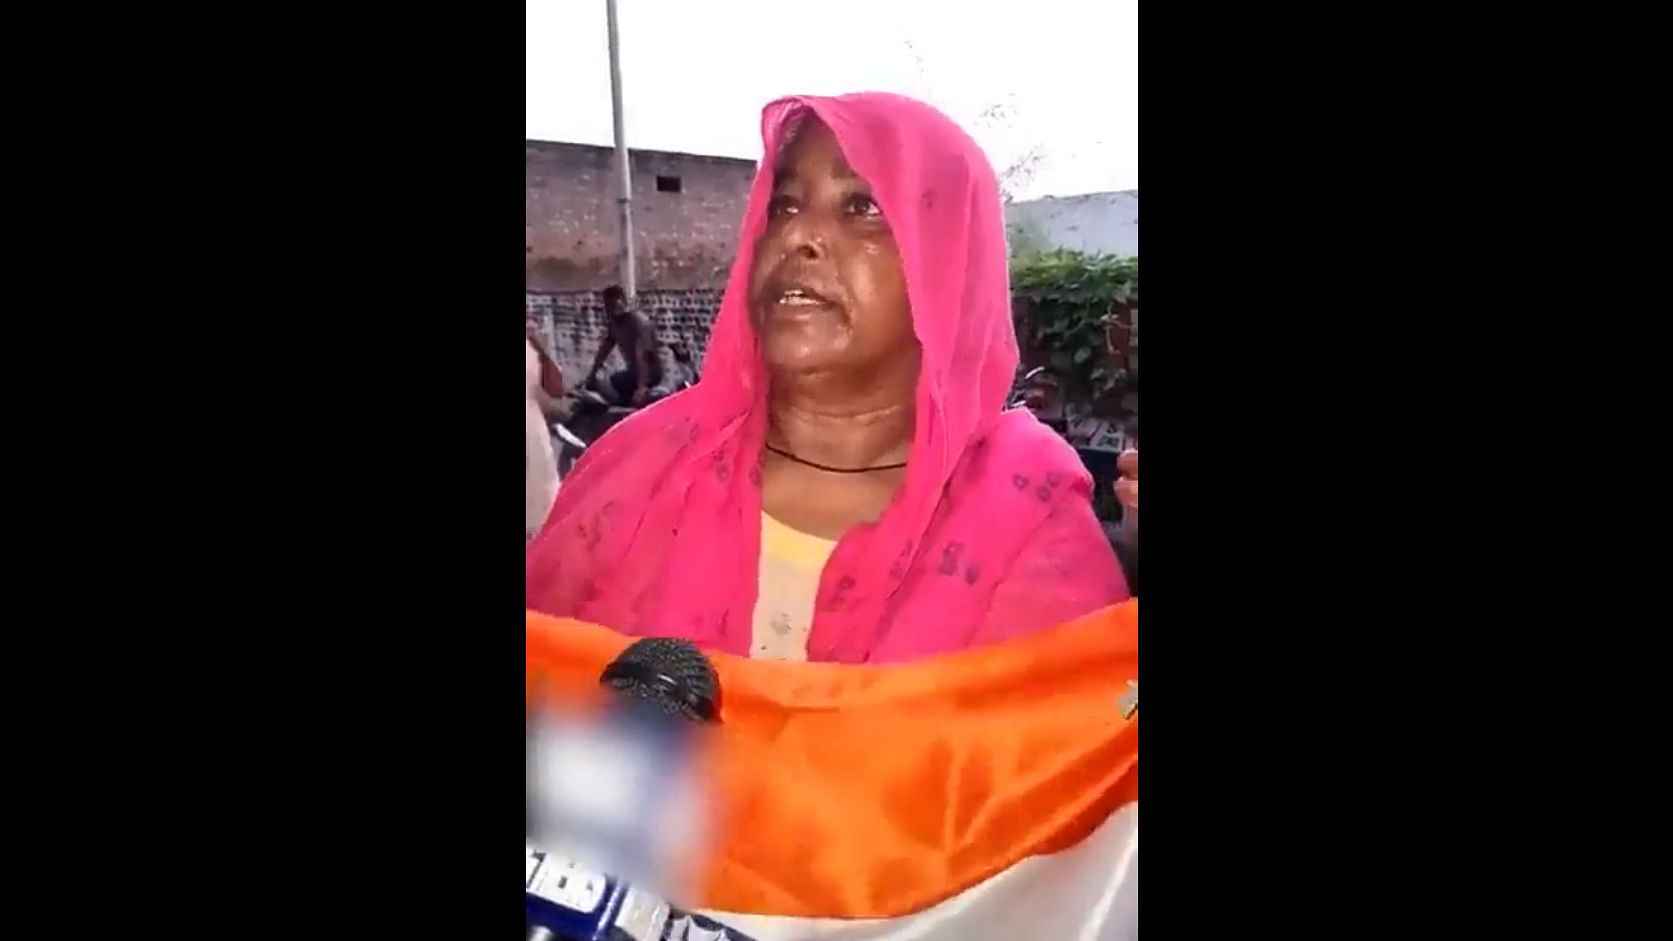 The Pilibhit MP posted a video purportedly showing some ration card holders complaining about being forced to pay Rs 20 to buy the flag. Credit: Twitter/ @varungandhi80